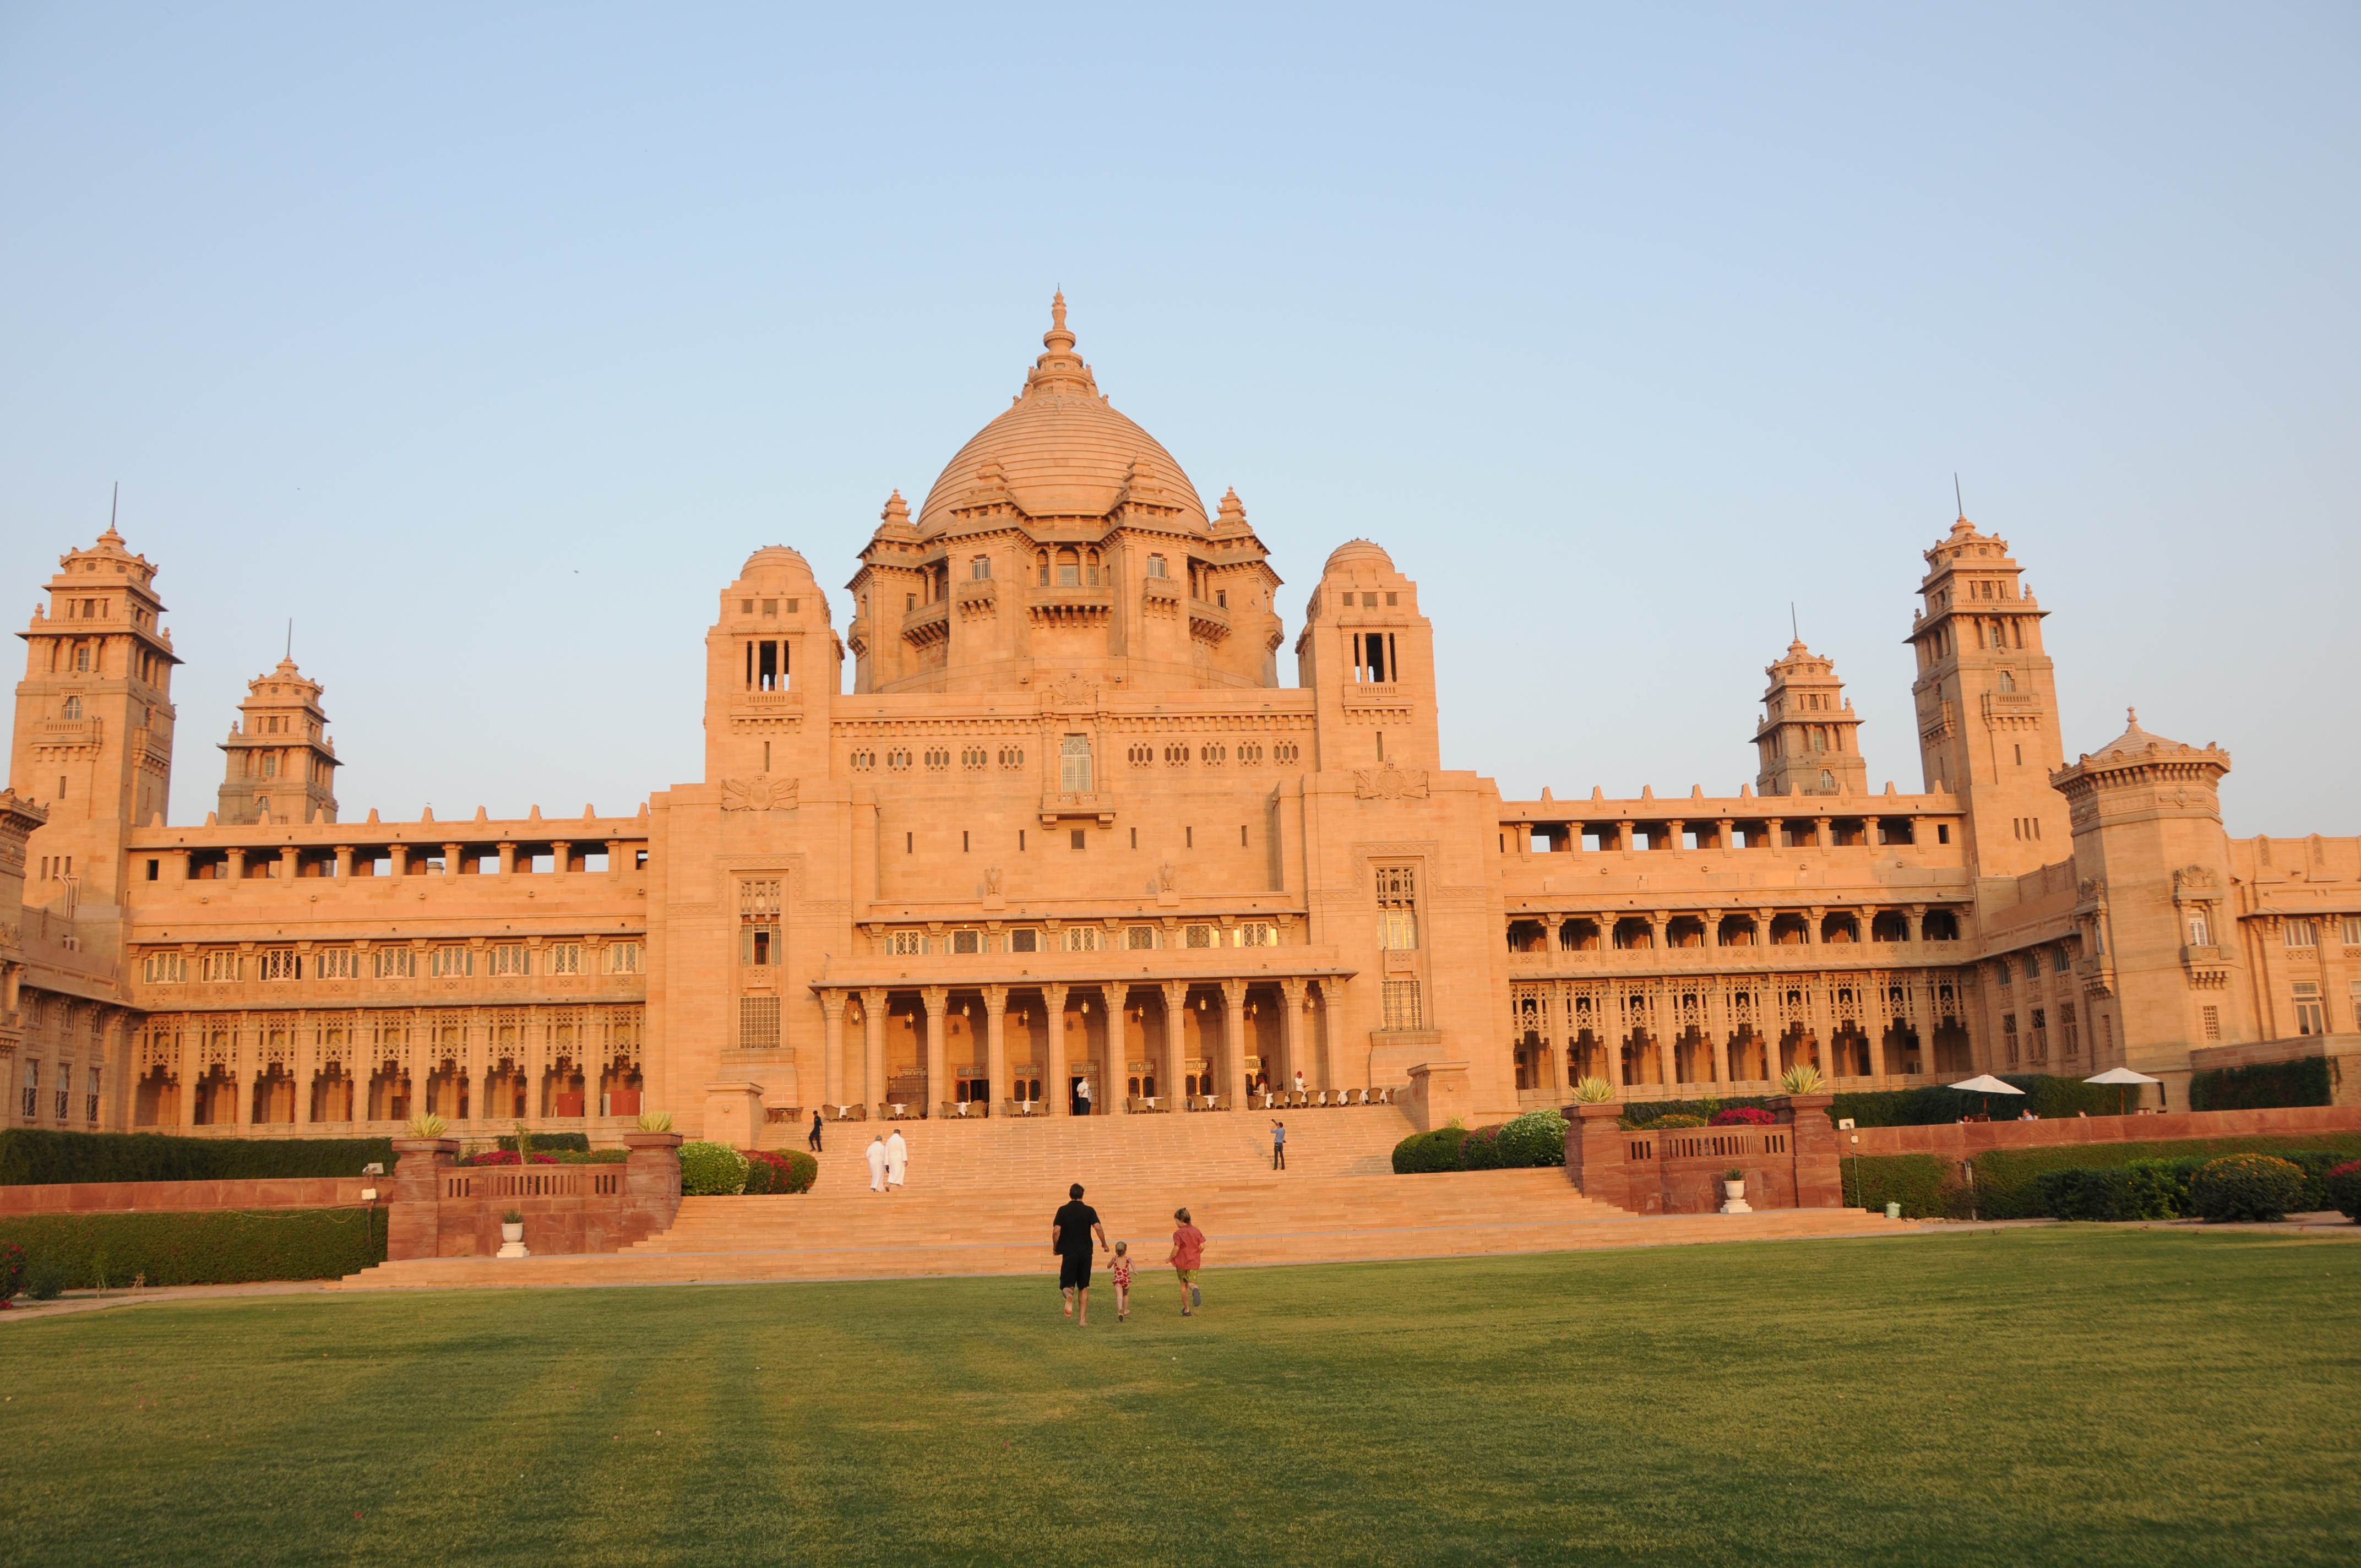 India Famous Places, India Famous Tourist Places and Tourist Attractions